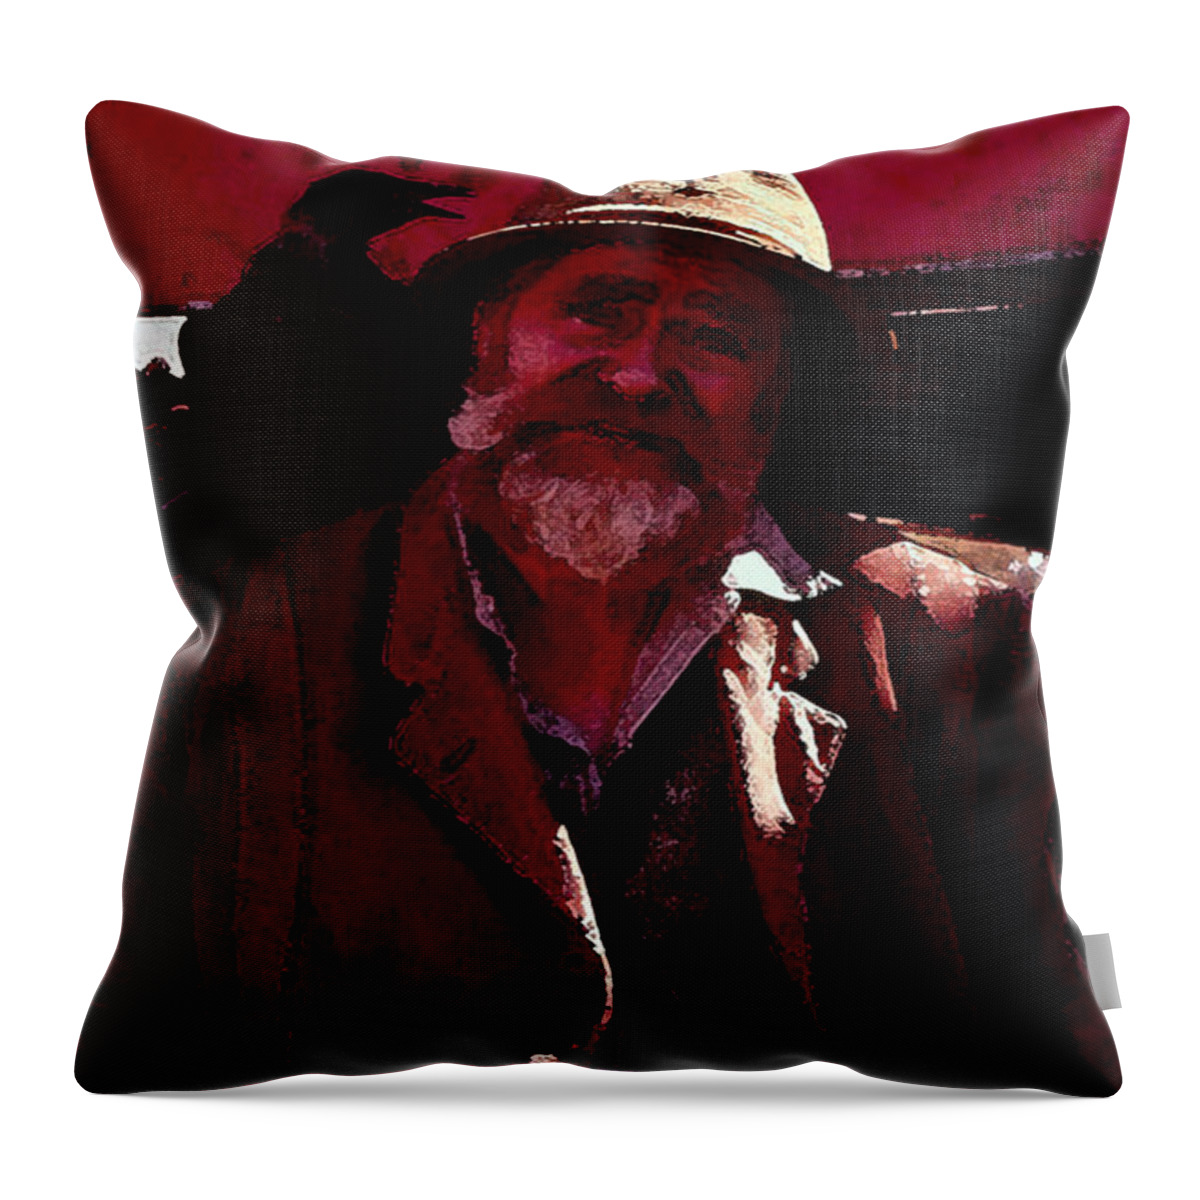 Sailor Throw Pillow featuring the digital art Man of the Sea by Cathy Anderson